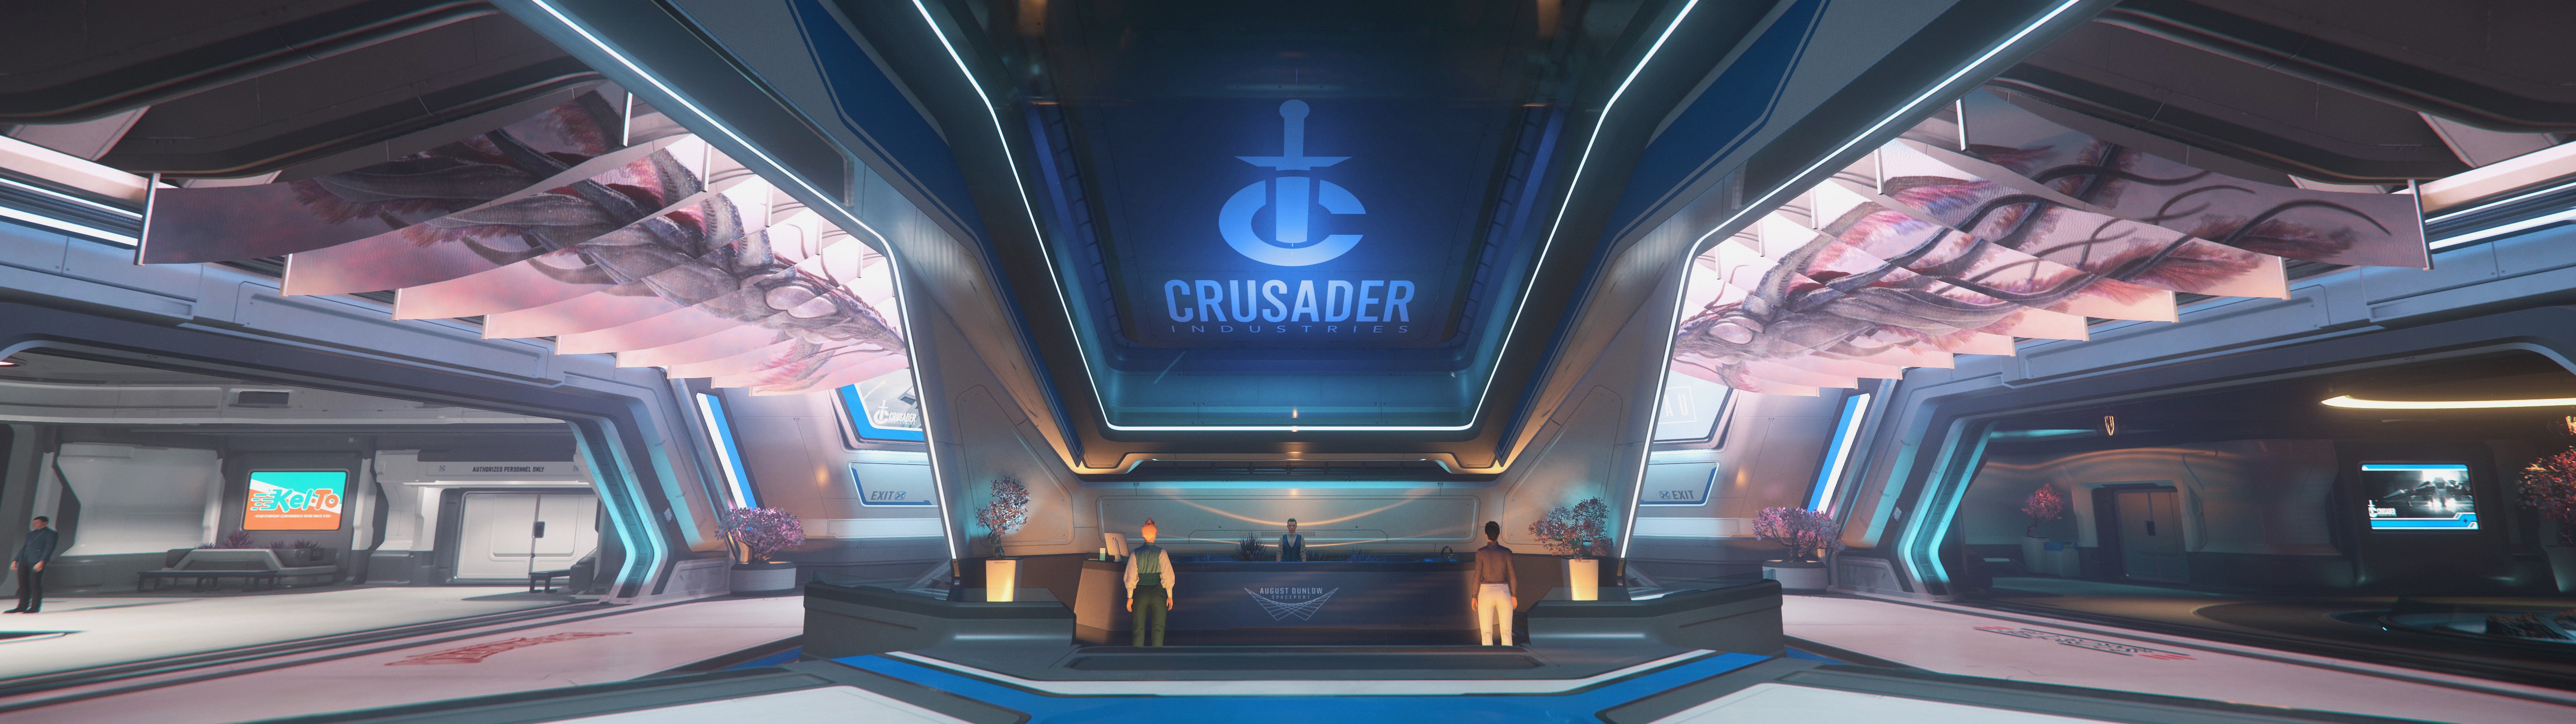 Star Citizen Orison Crusader Industries Ultrawide Floating City Spaceport Video Games 5120x1440